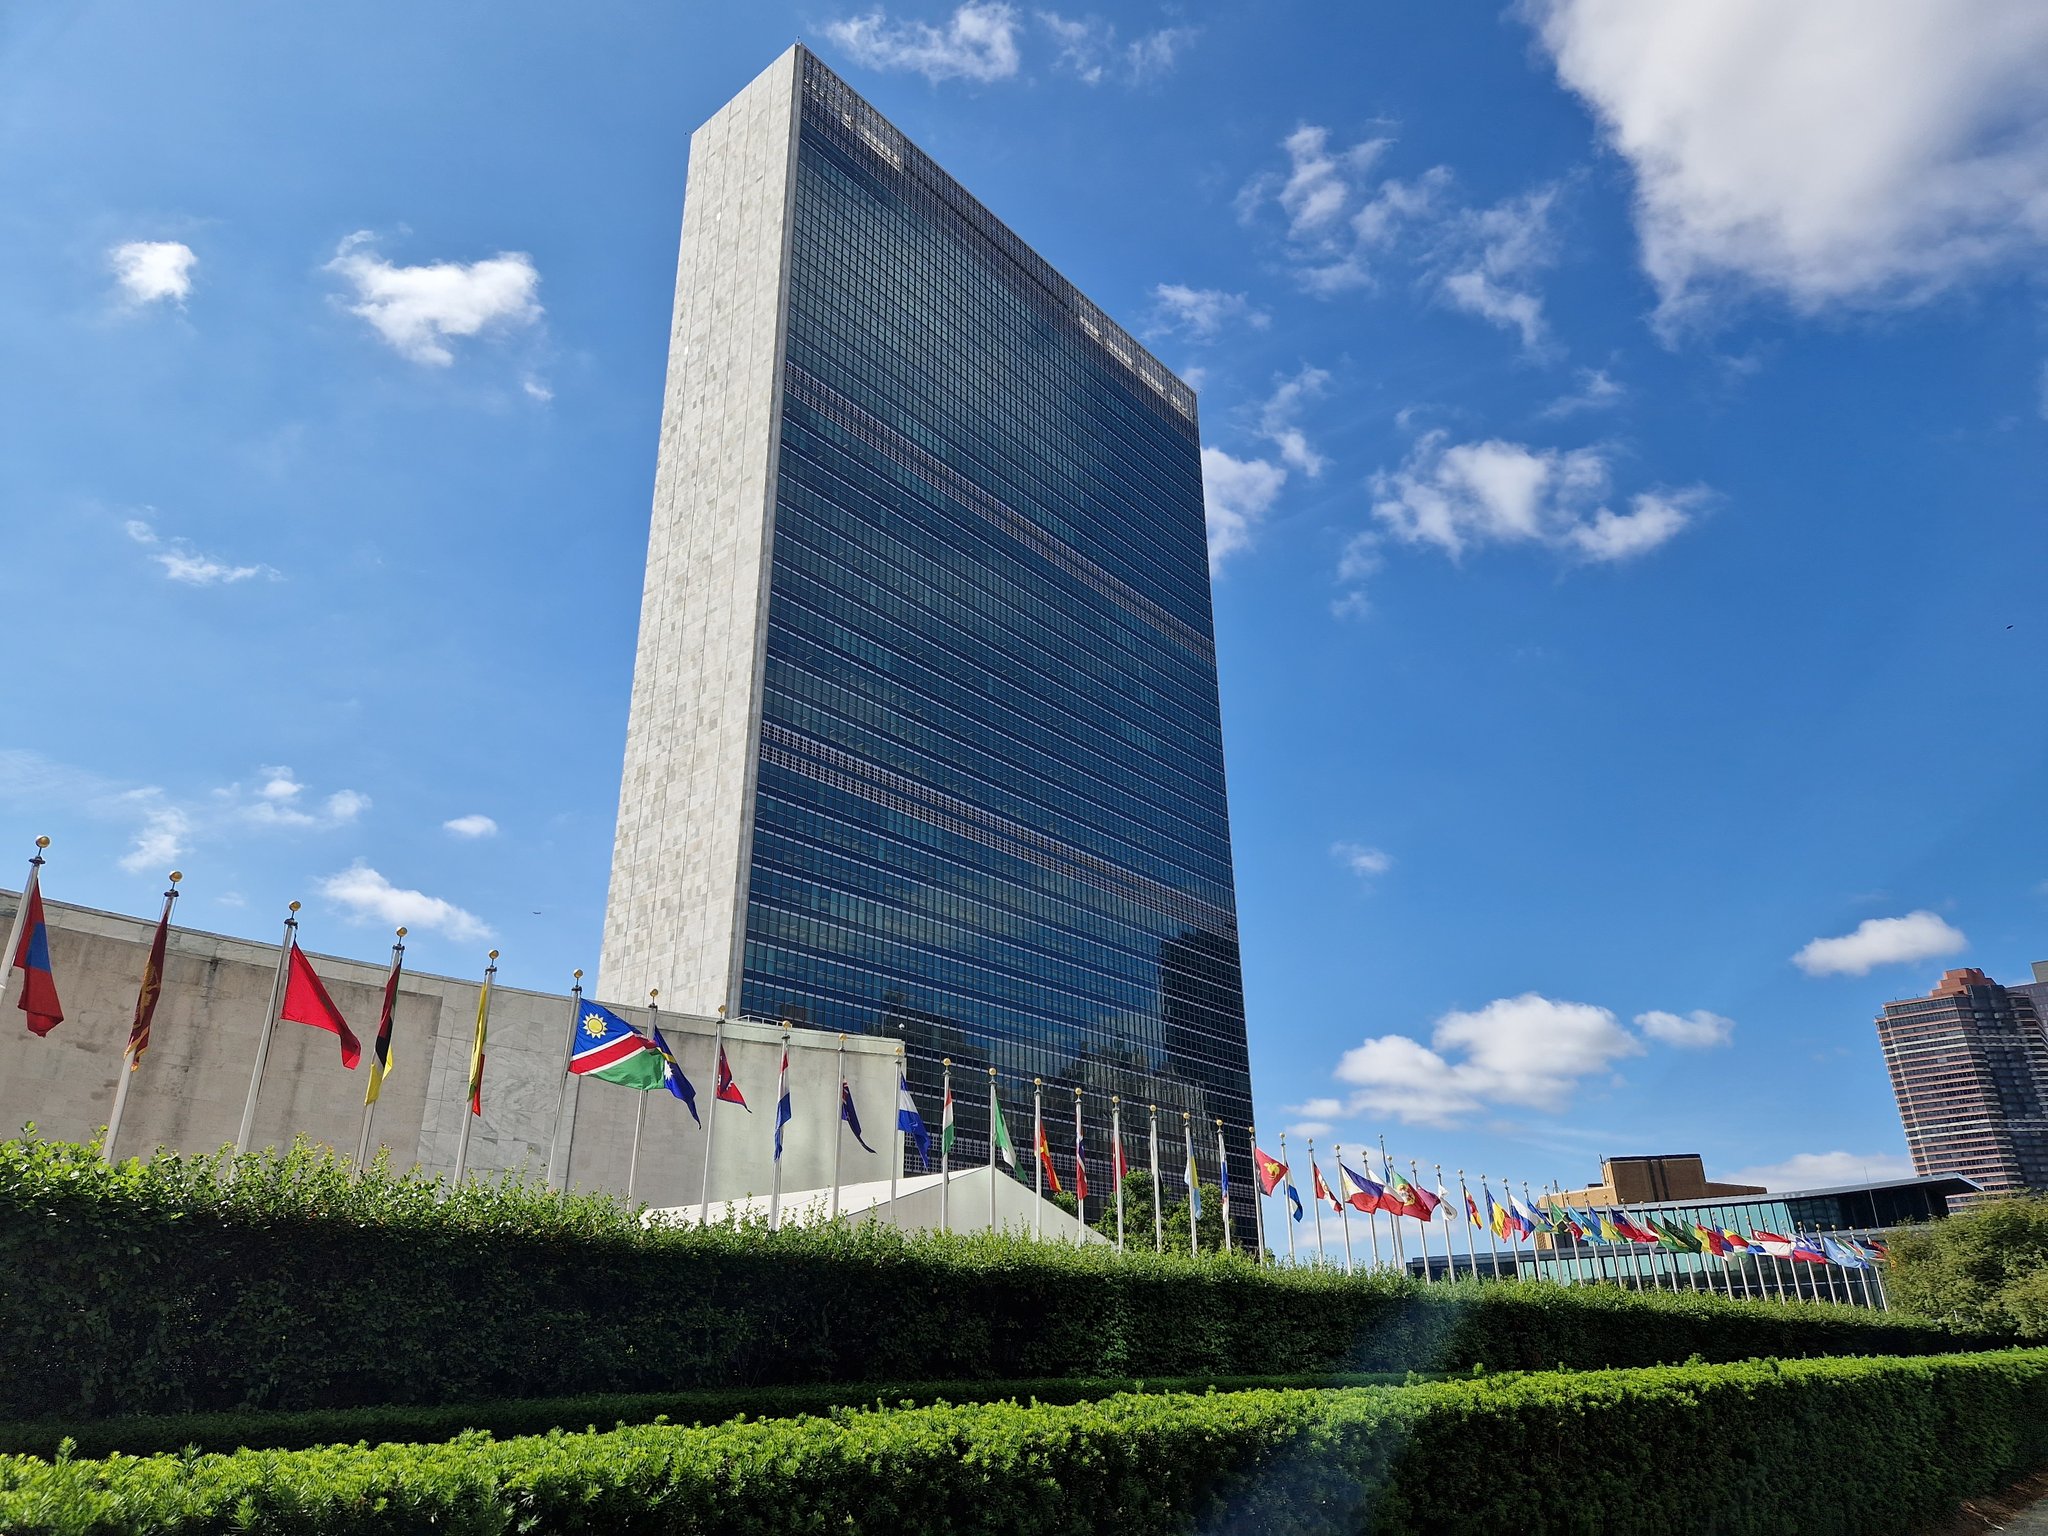 Image of UN building from the outside, with flags in foreground and blue sky. Cover Image